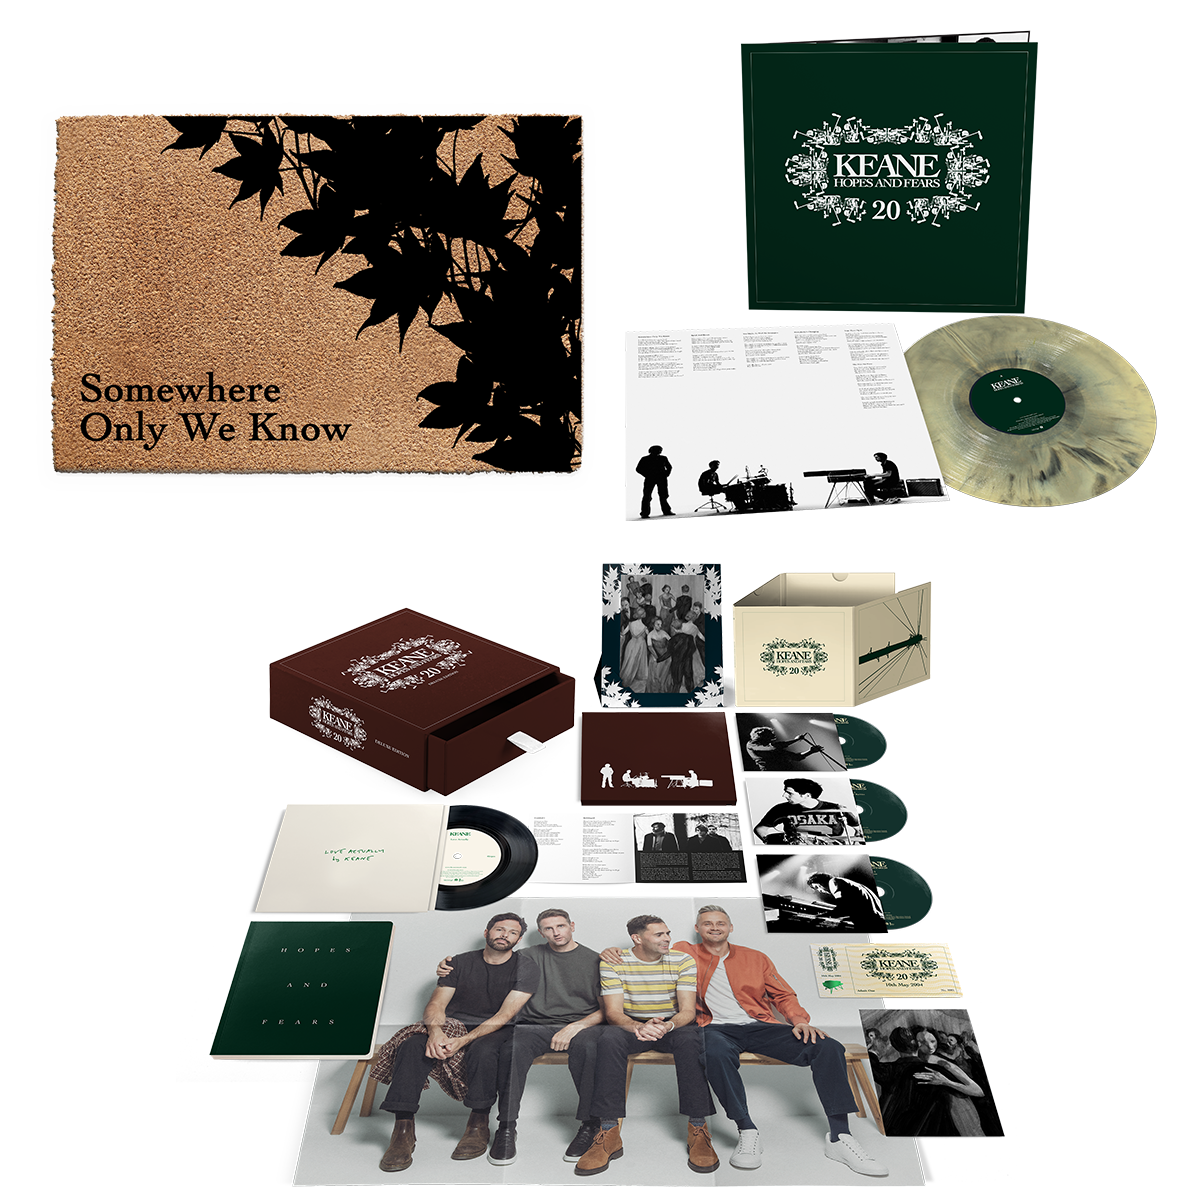 20th Anniversary Limited Deluxe 3CD Box Set + Galaxy Vinyl LP + Official Somewhere Only We Know door mat